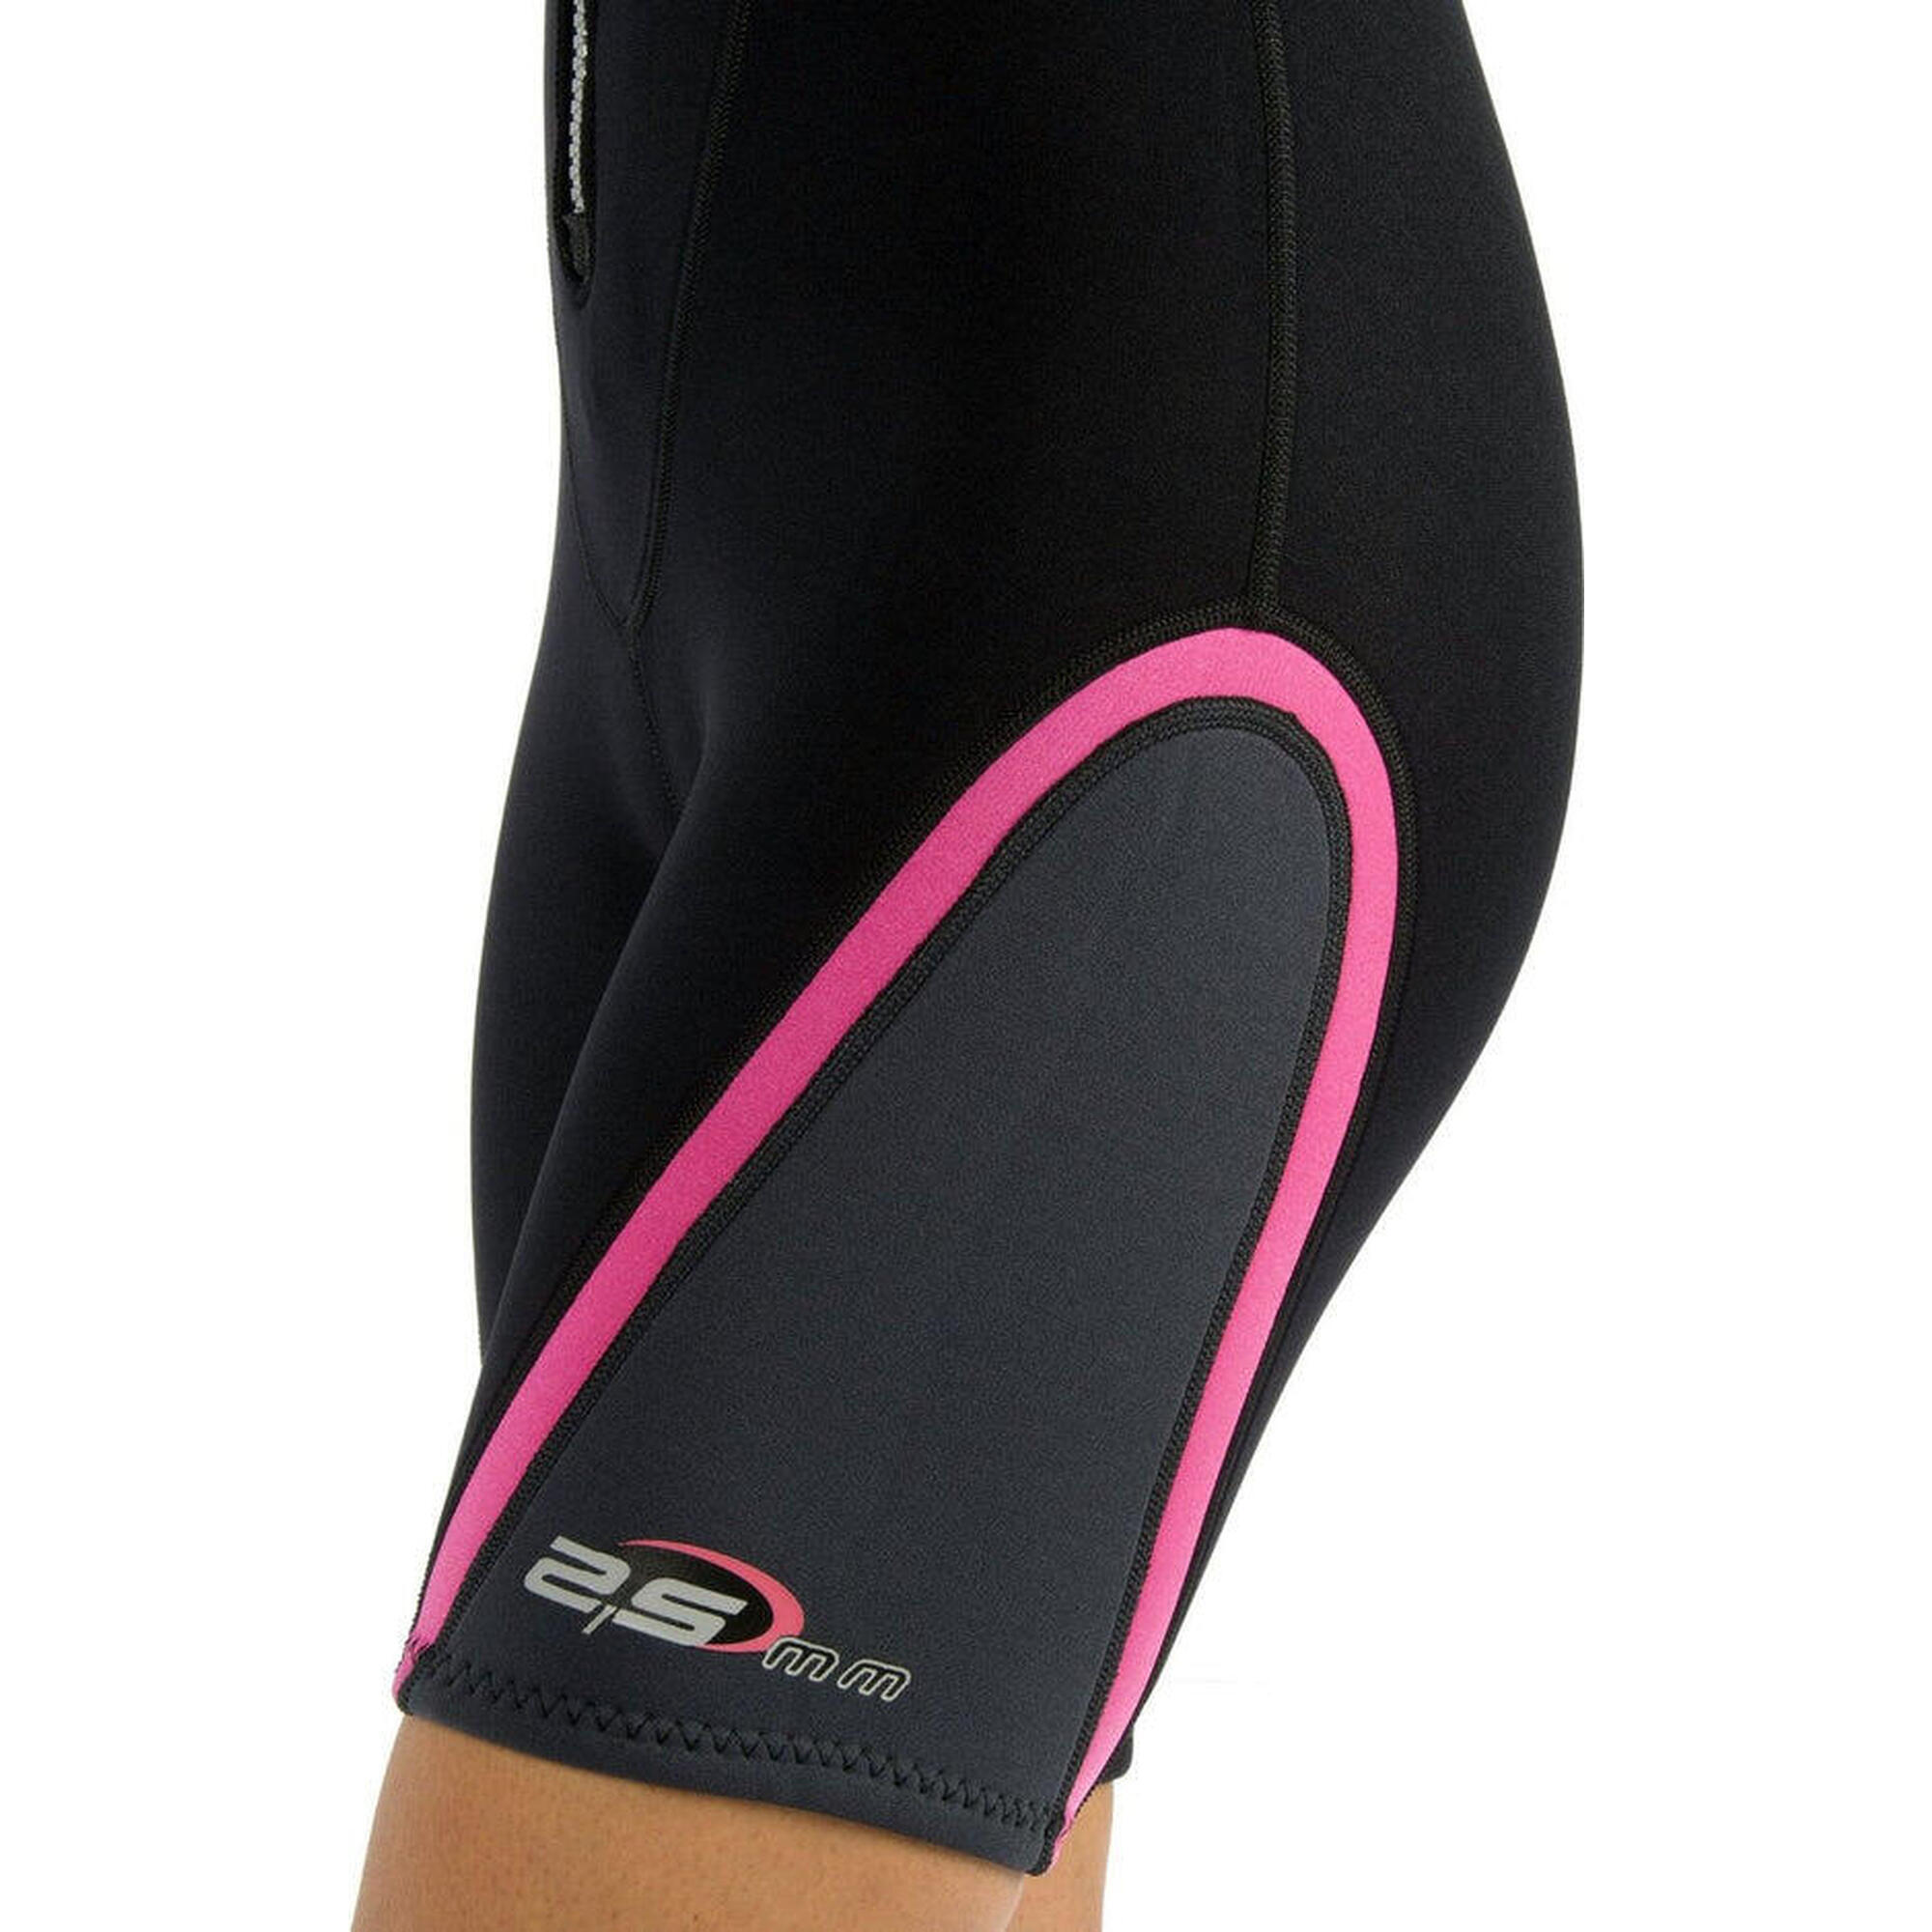 Playa Shorty Wetsuit 2.5mm Lady - S